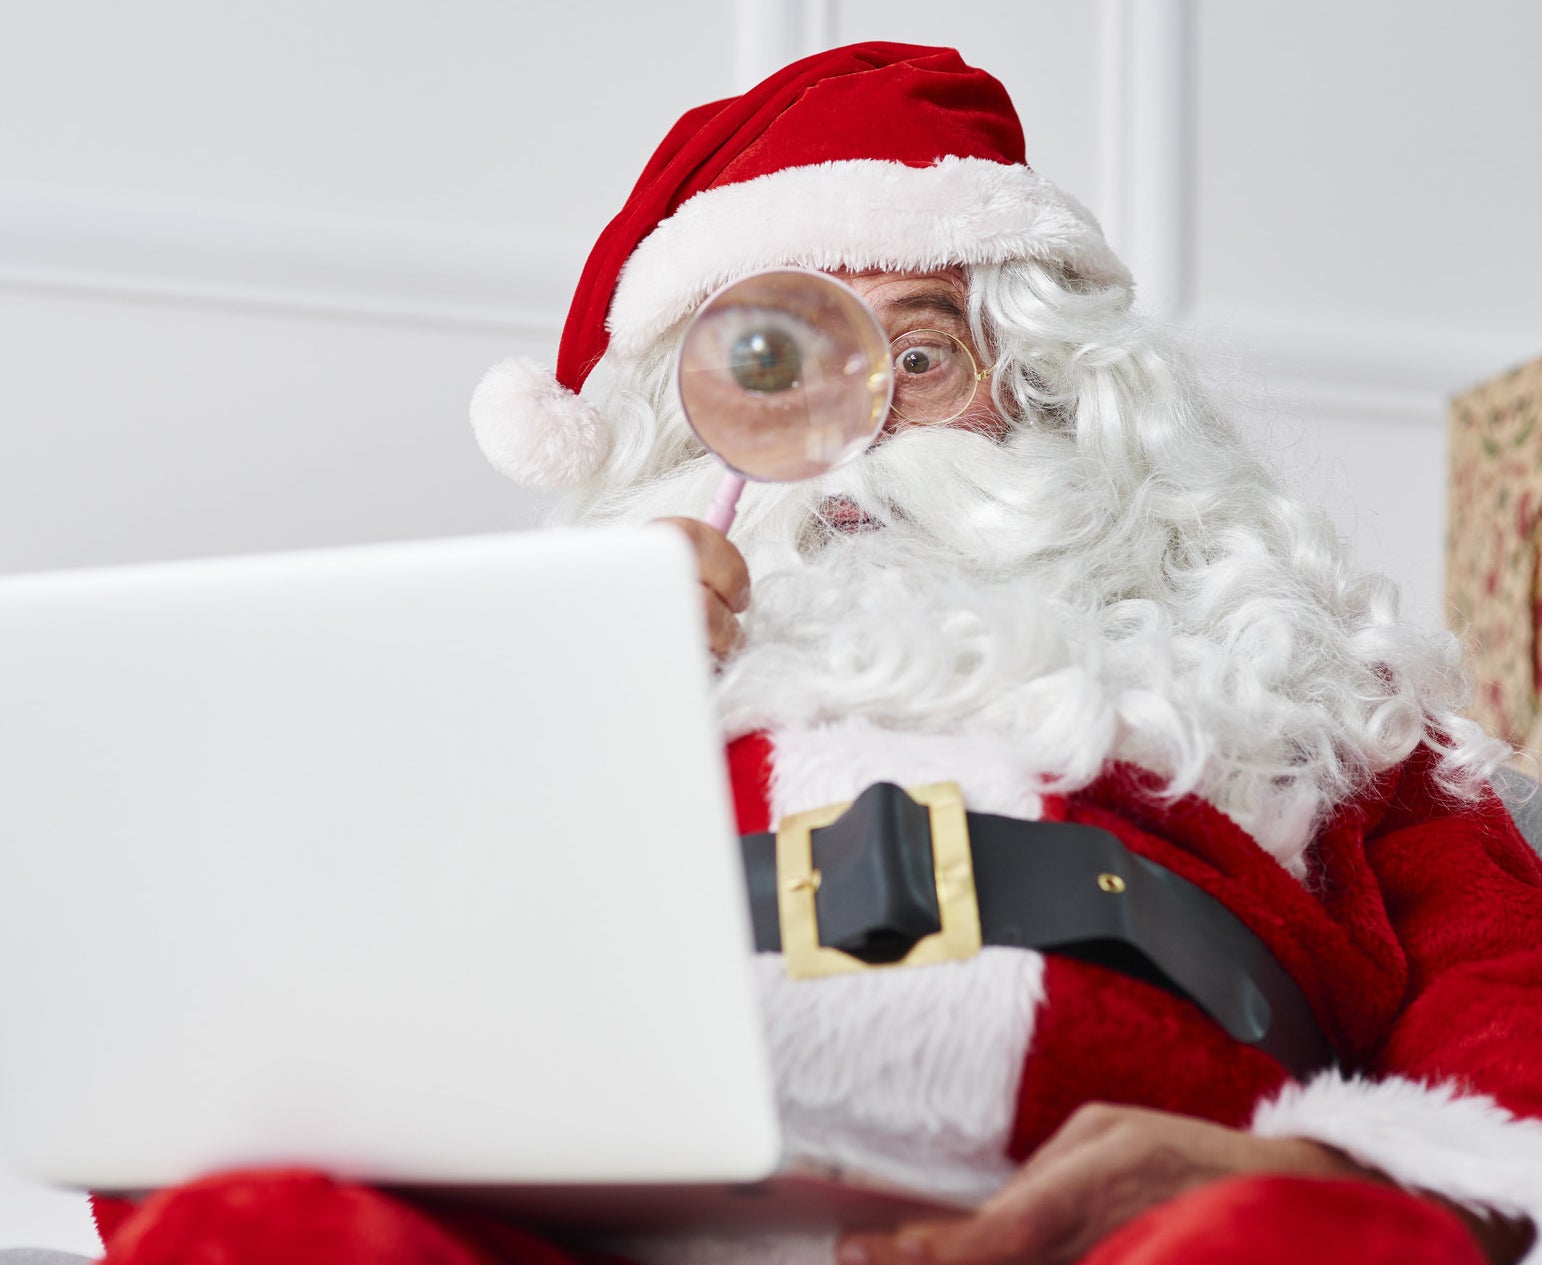 A photo of Santa sitting down with a laptop on his knee holding a magnifying glass up to his eye.